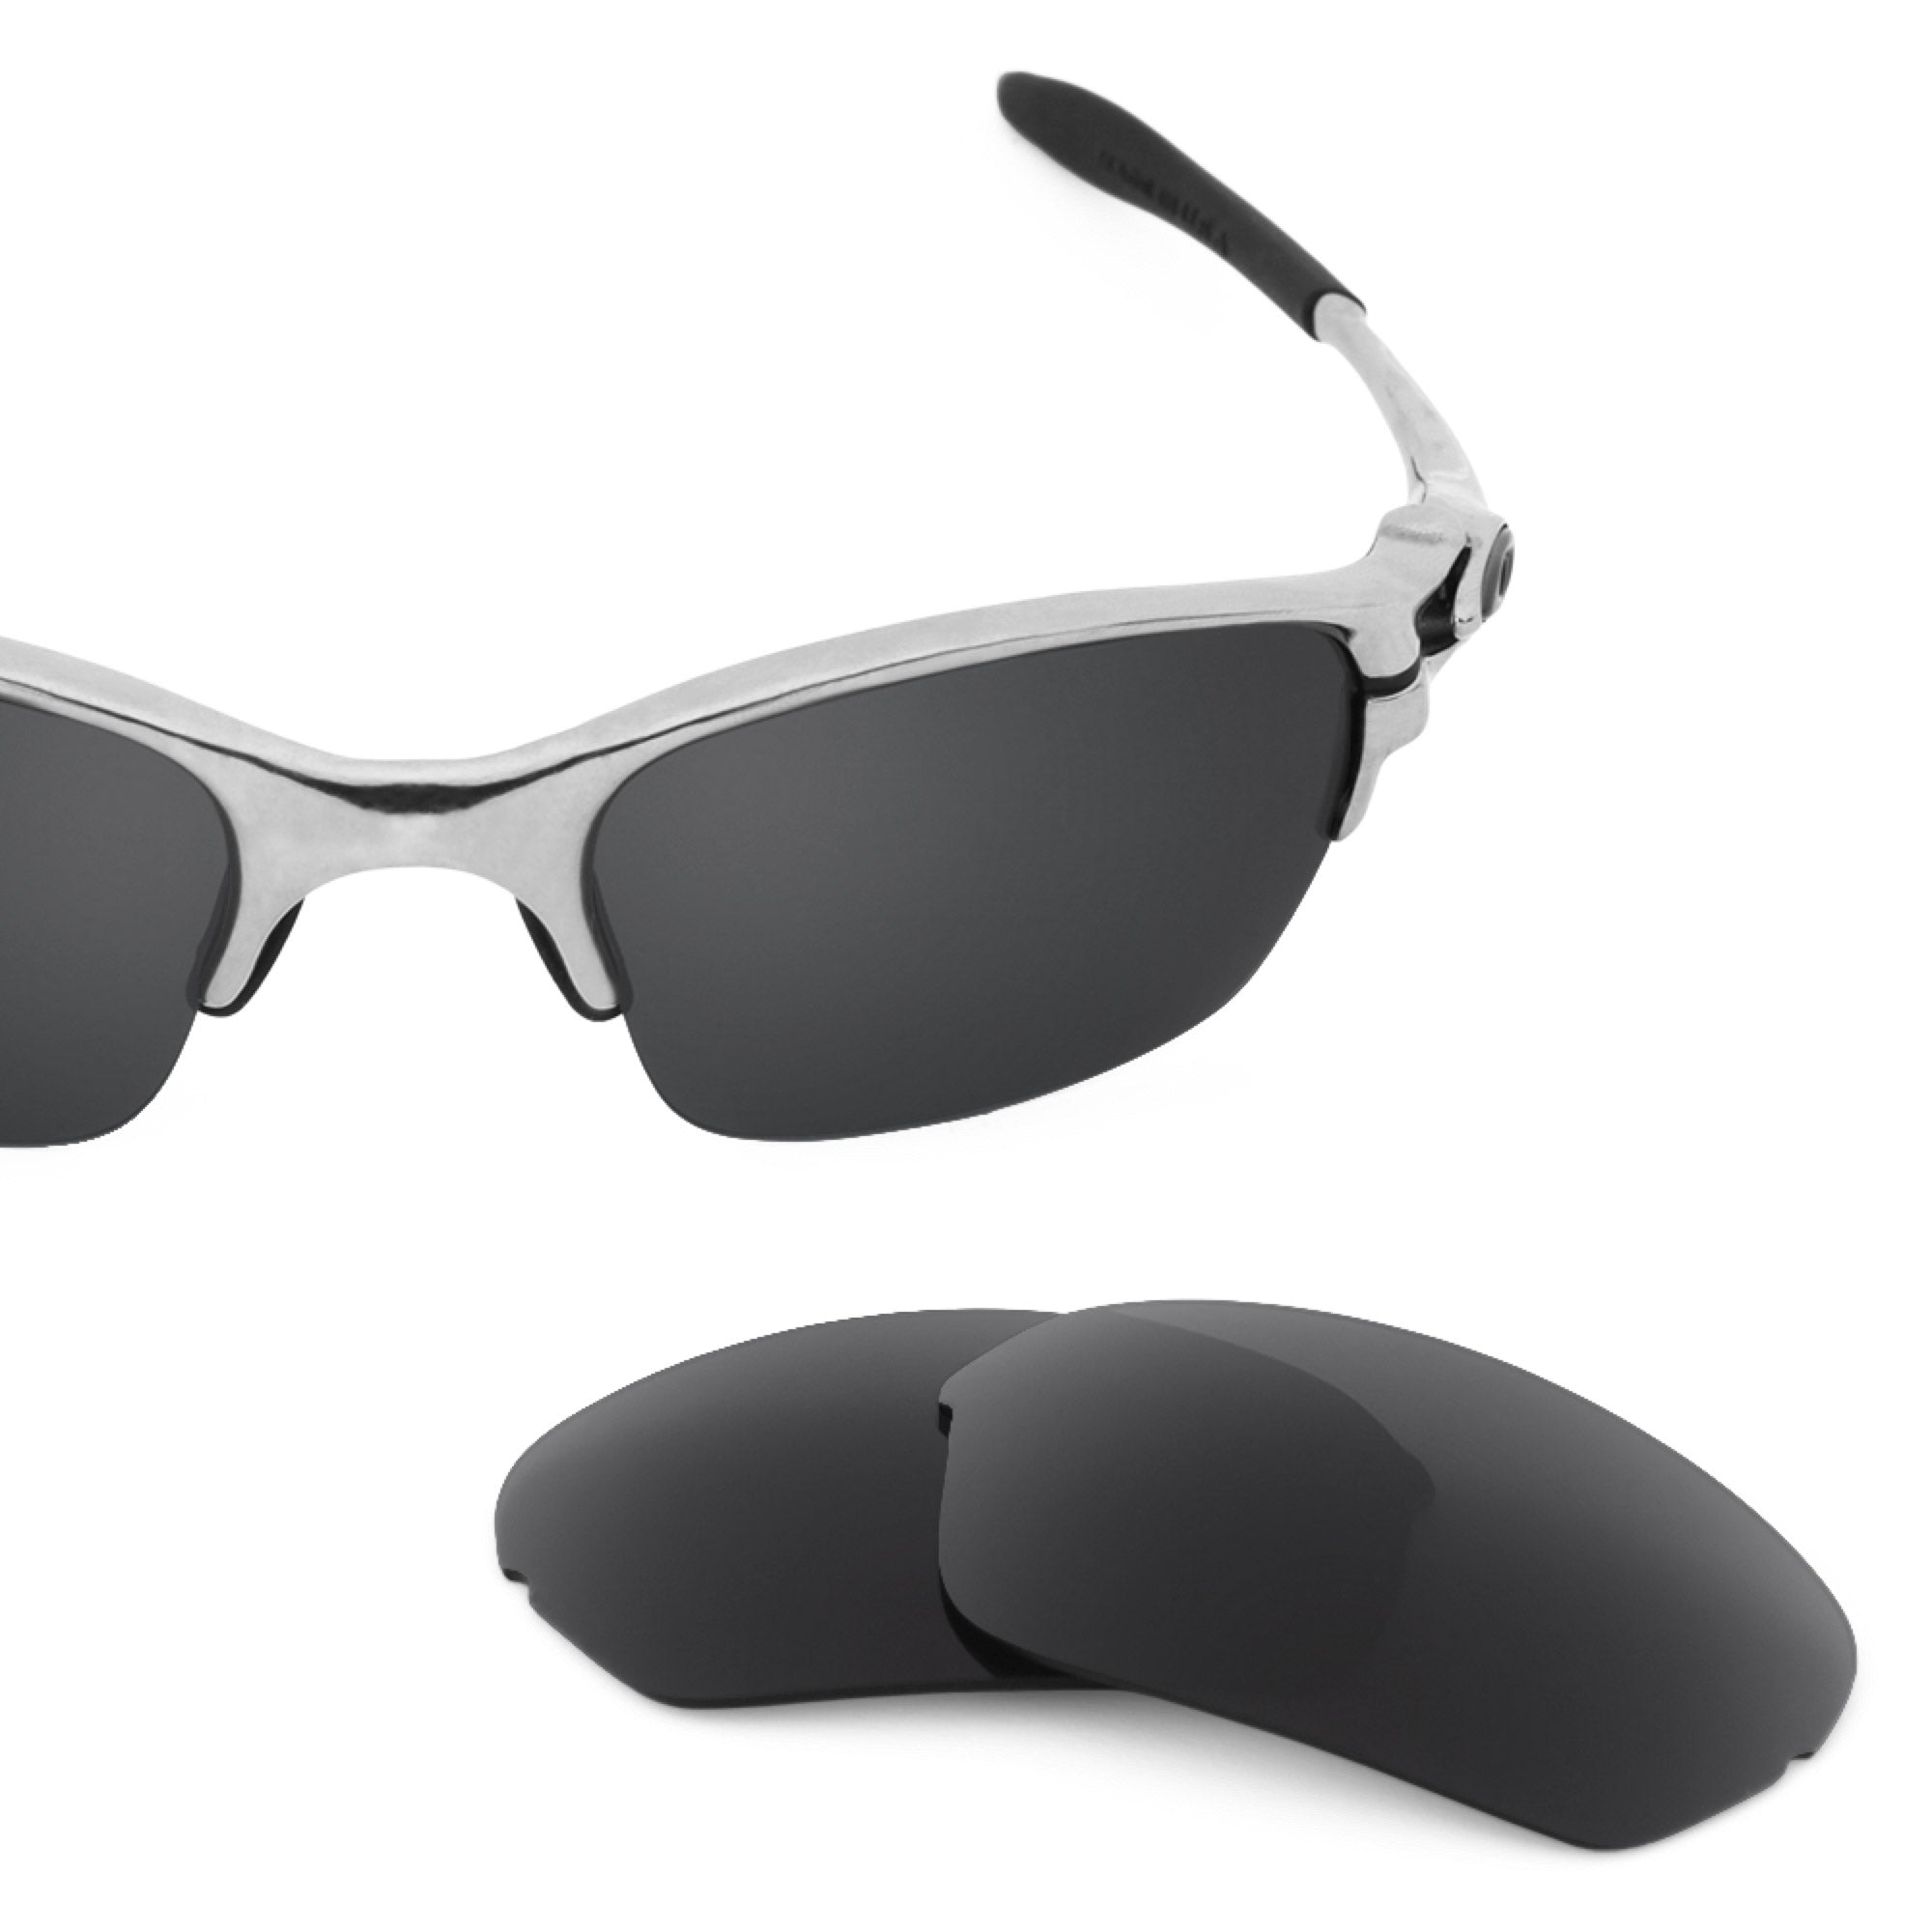 Oakley OO9417 Holbrook XL Sunglasses - Men's | Up to 36% Off w/ Free S&H